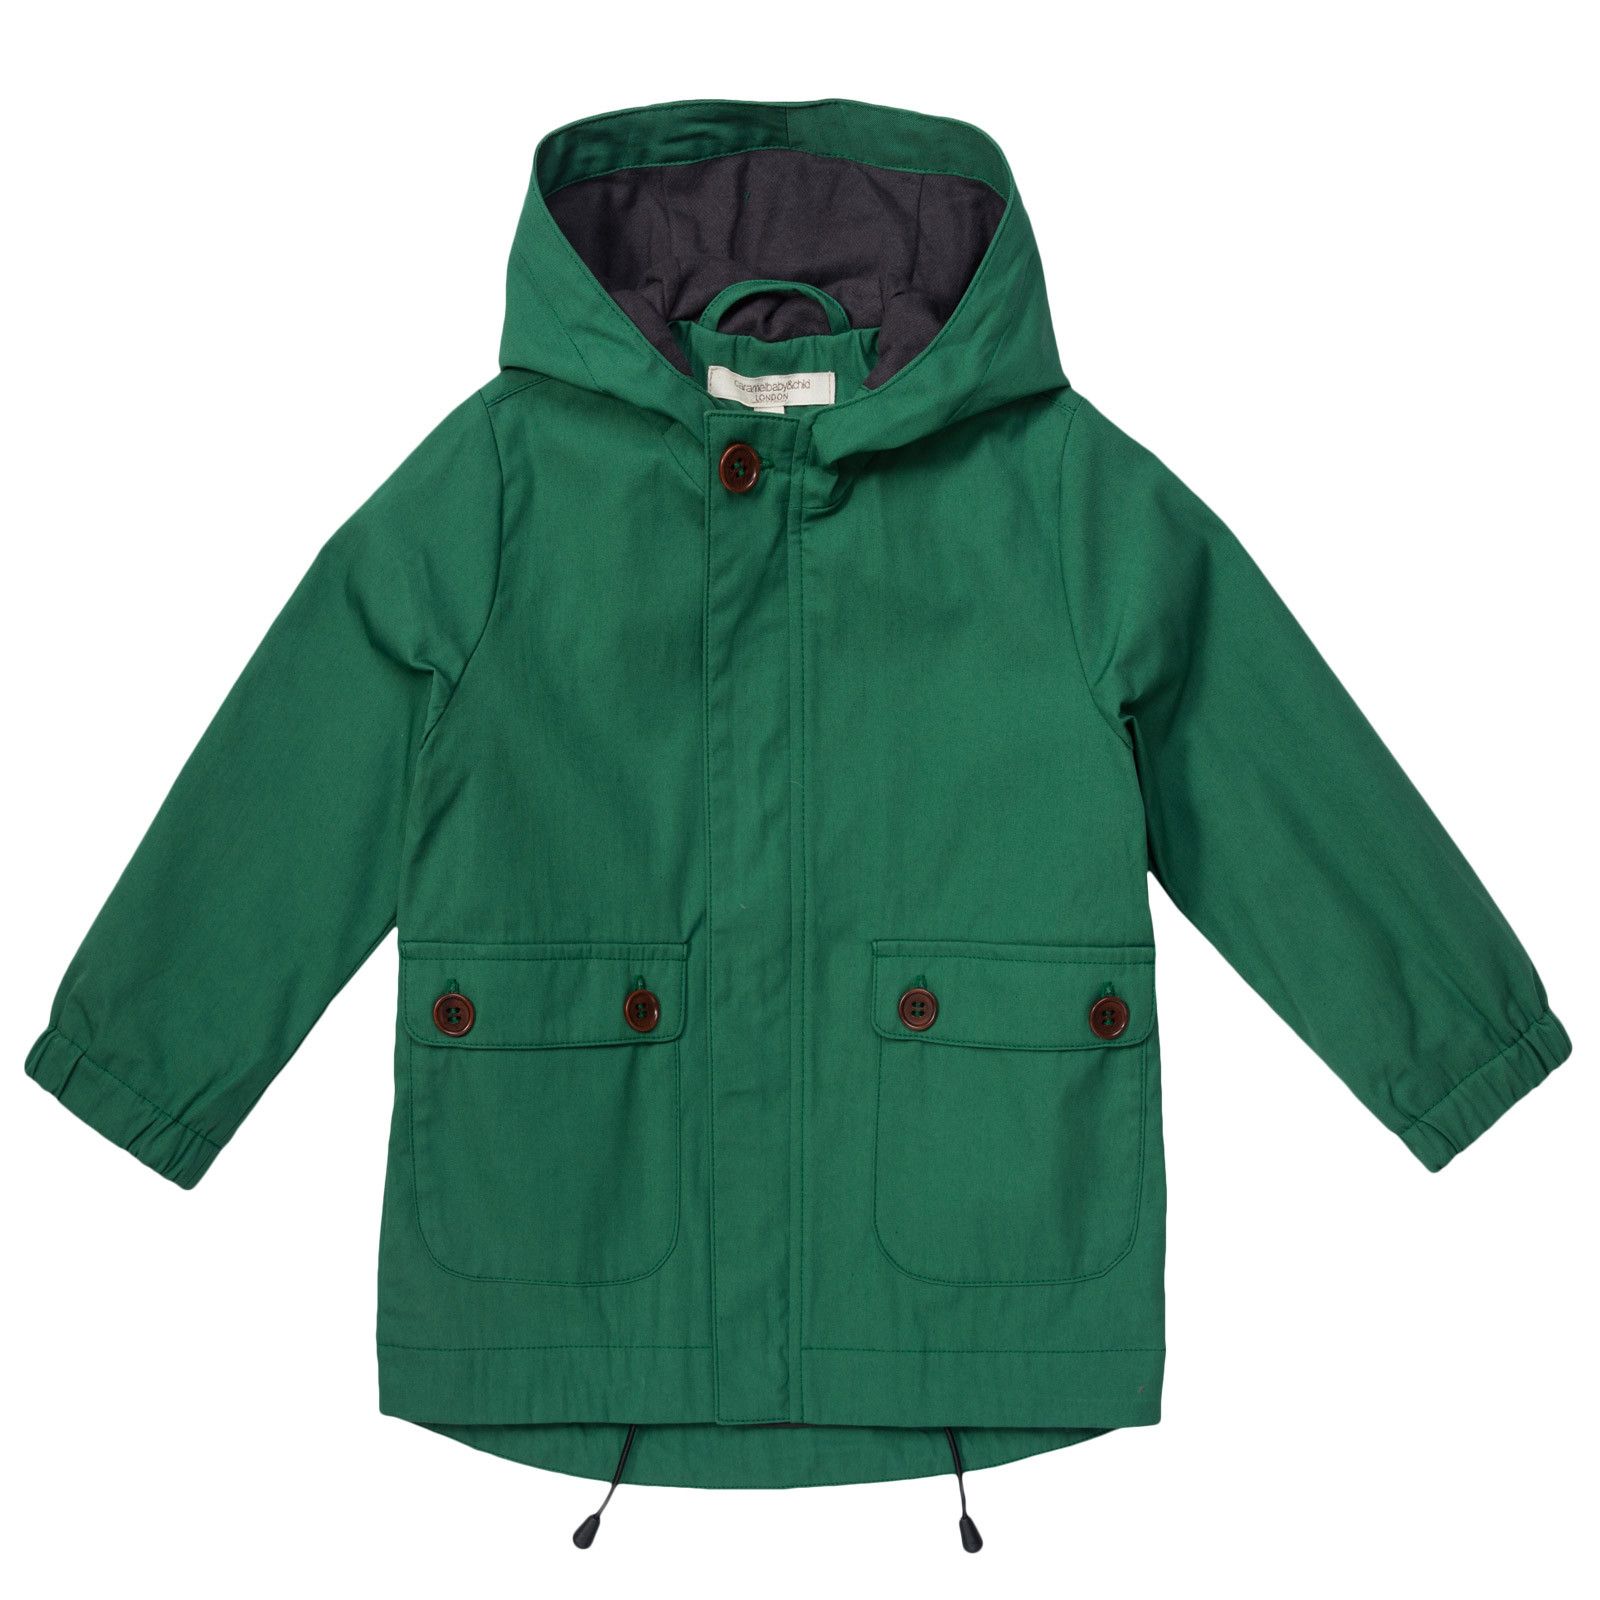 Boys Green Hooded Coat With Patch Pockets - CÉMAROSE | Children's Fashion Store - 1